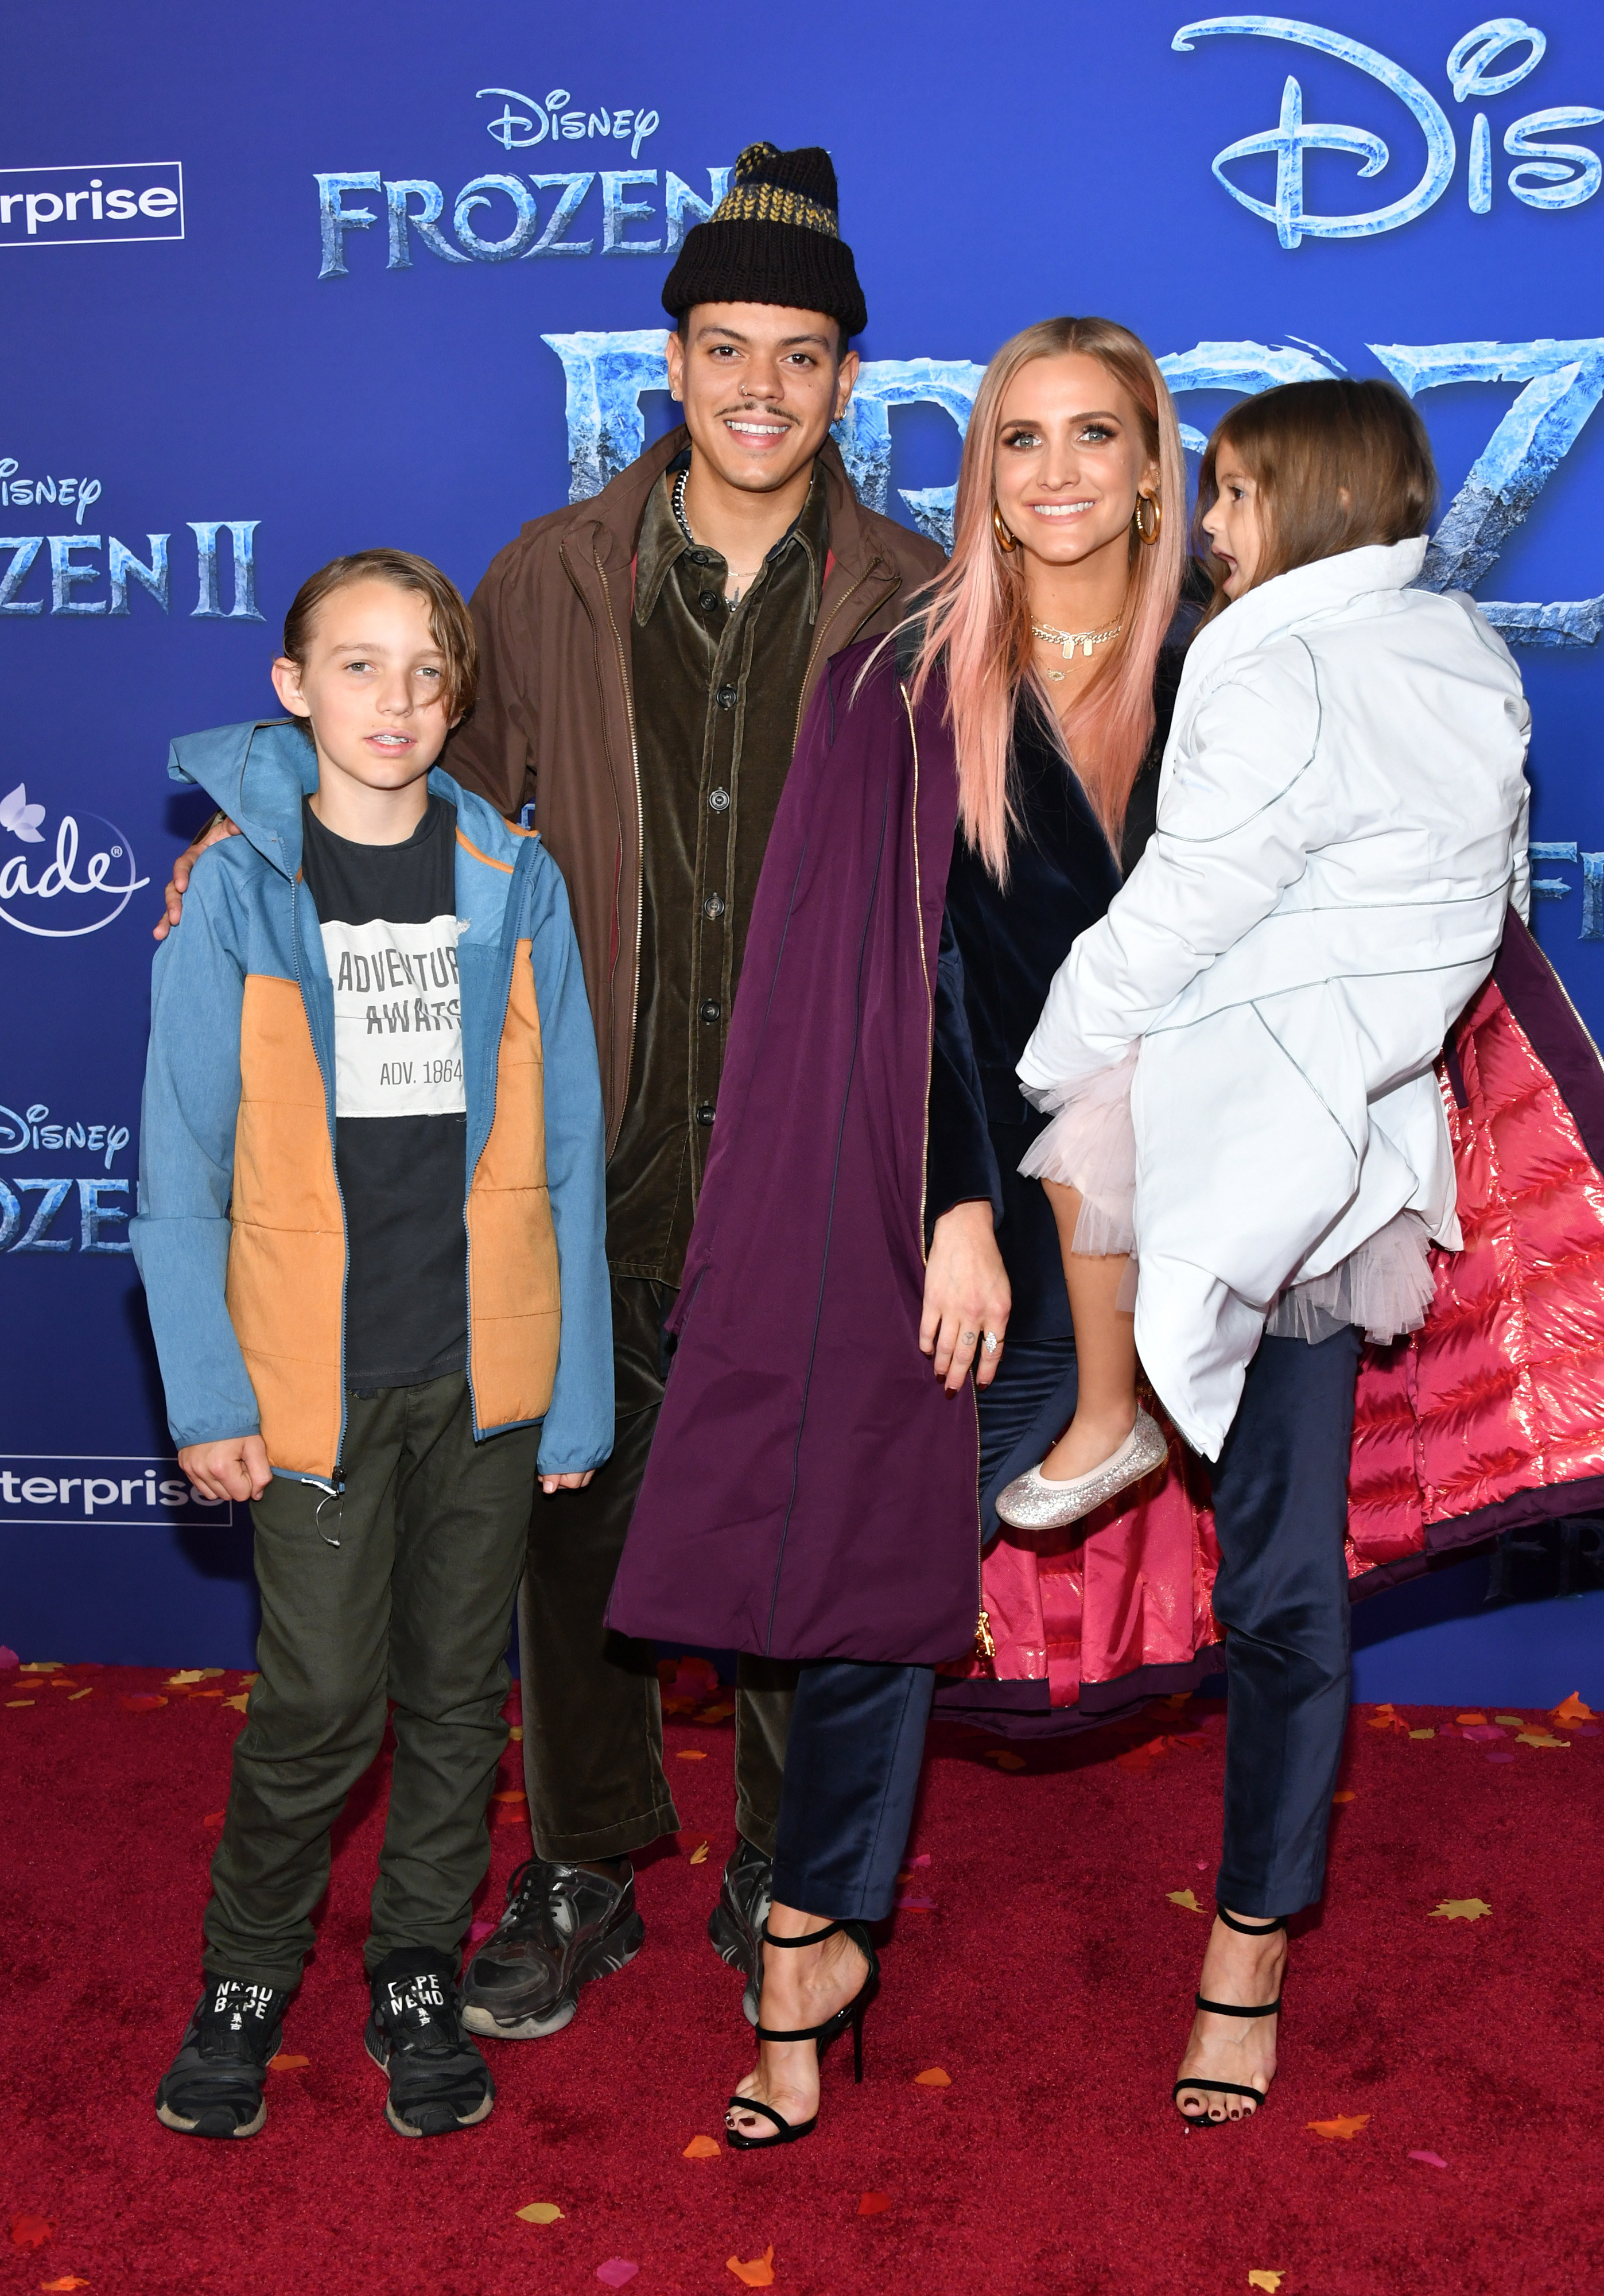 Bronx Wentz, Evan Ross, Ashlee Simpson and Jagger Snow Ross attend the premiere of Disney&#x27;s &quot;Frozen 2&quot; at Dolby Theatre on November 07, 2019